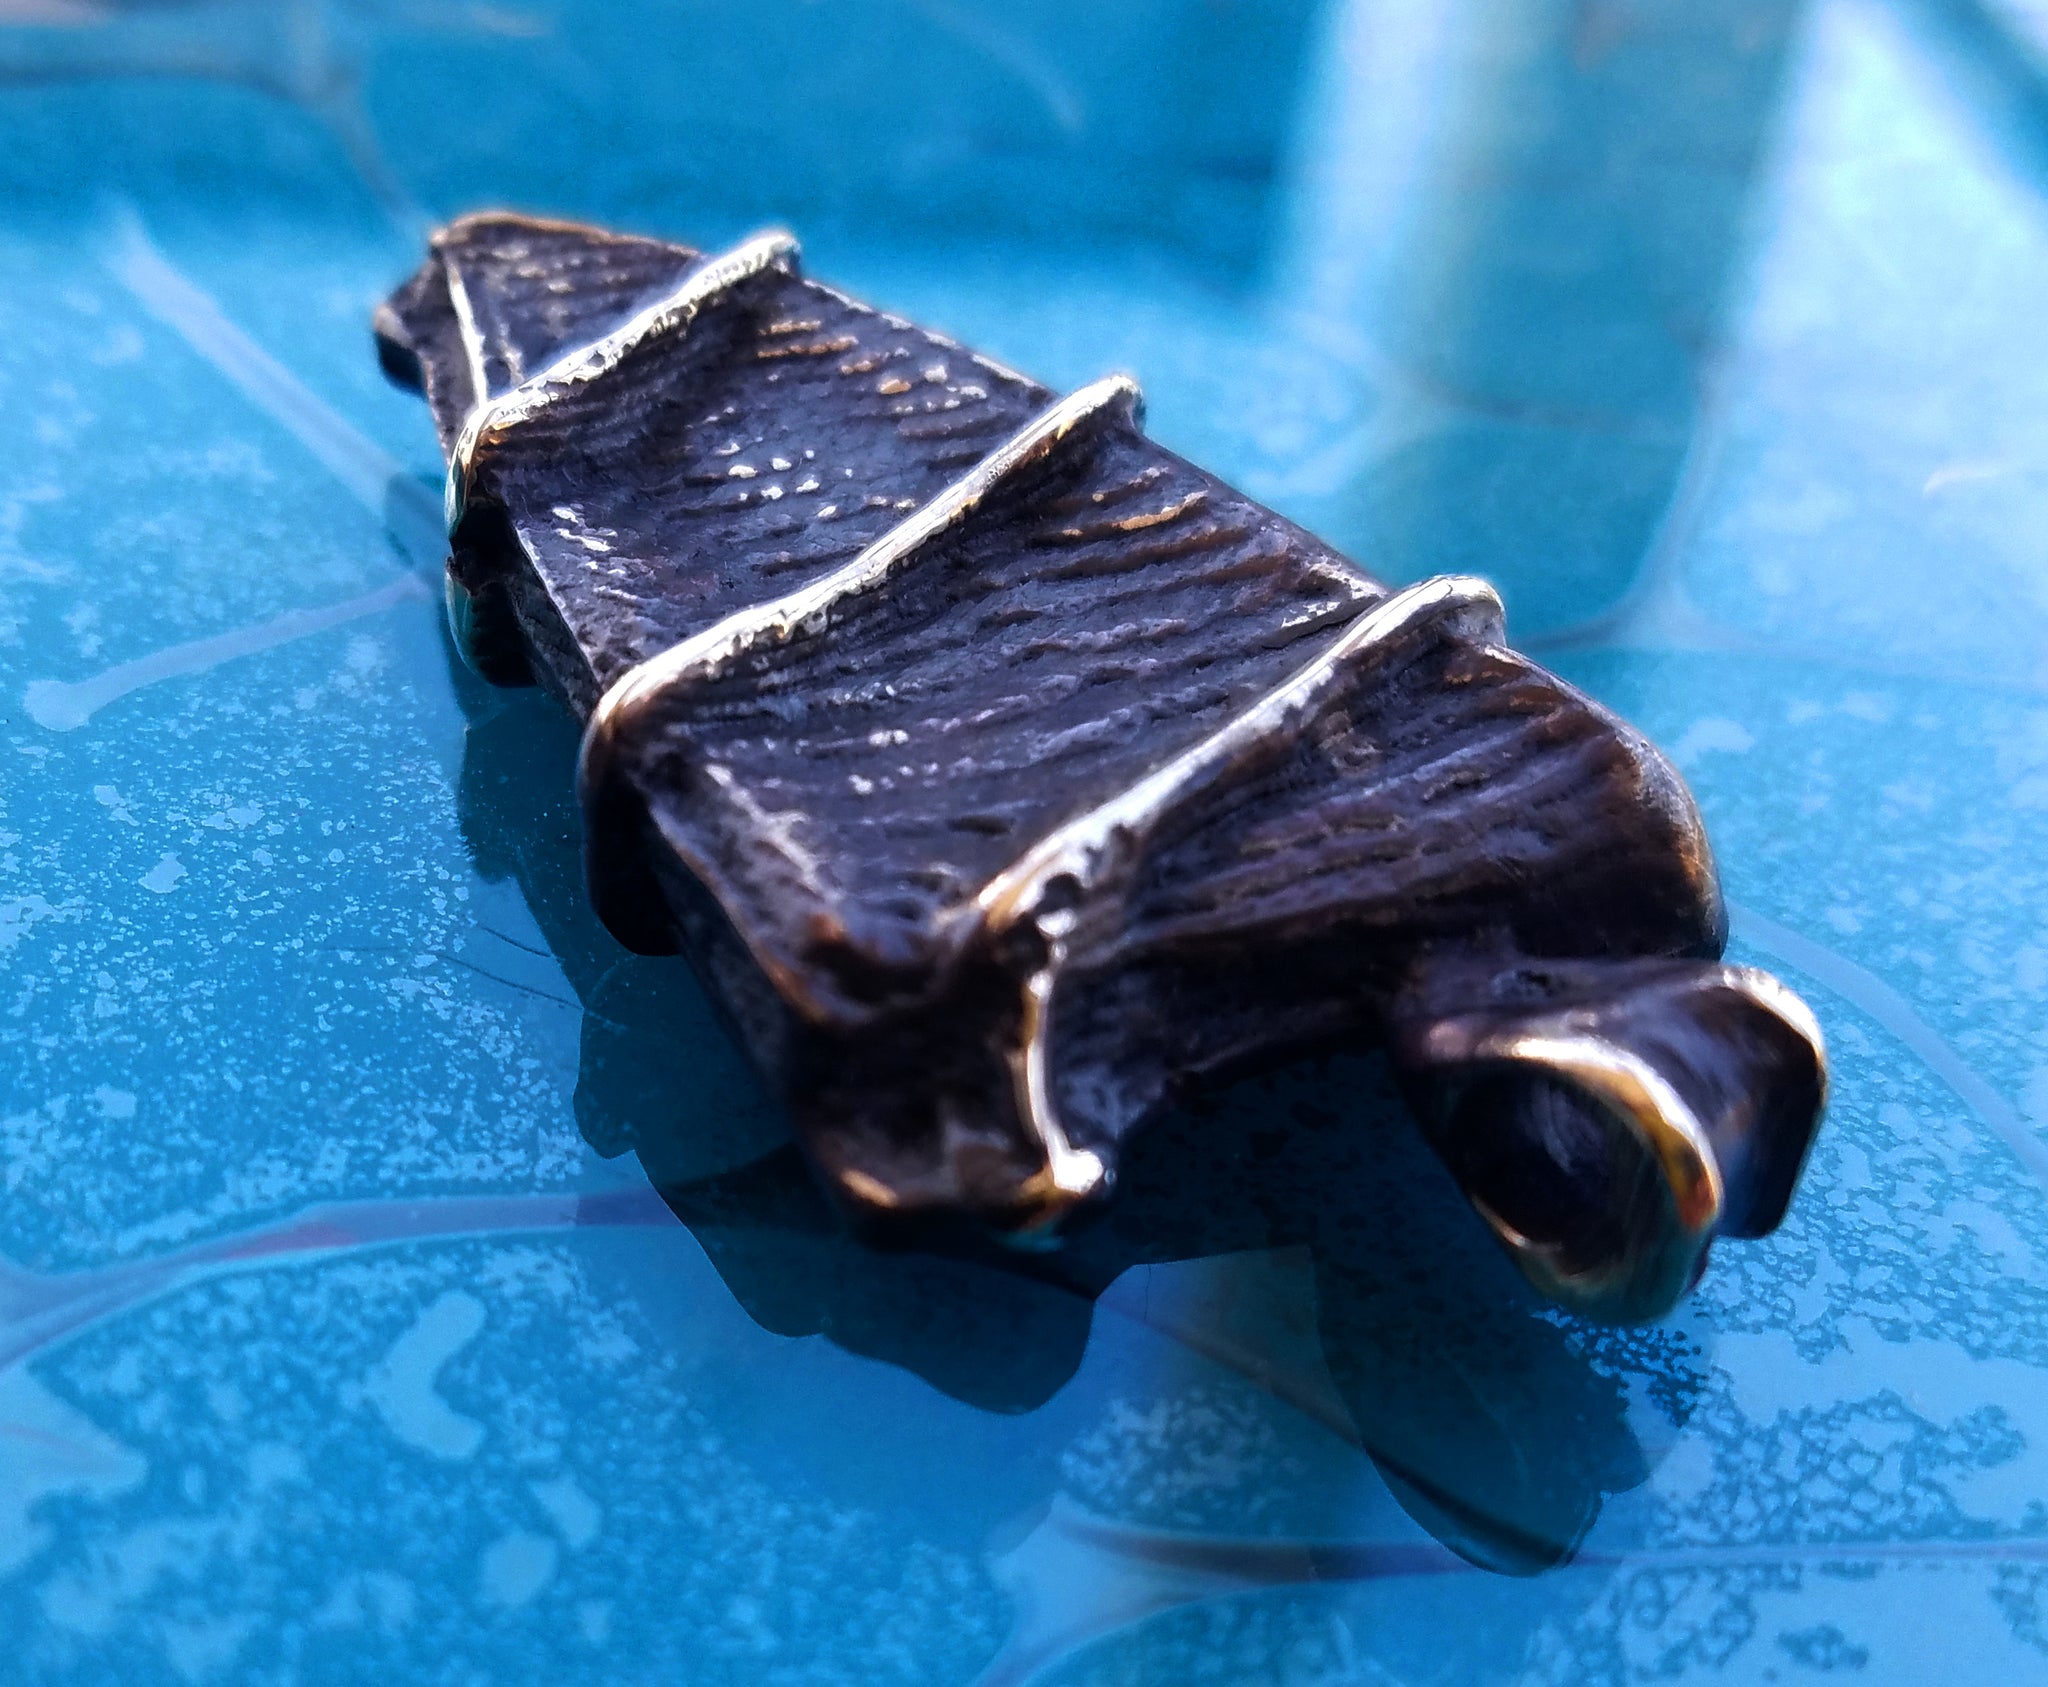 'Alien Artifact' Hand-carved Hand-poured Cuttlefish Cast Pendant #10 by Phantom